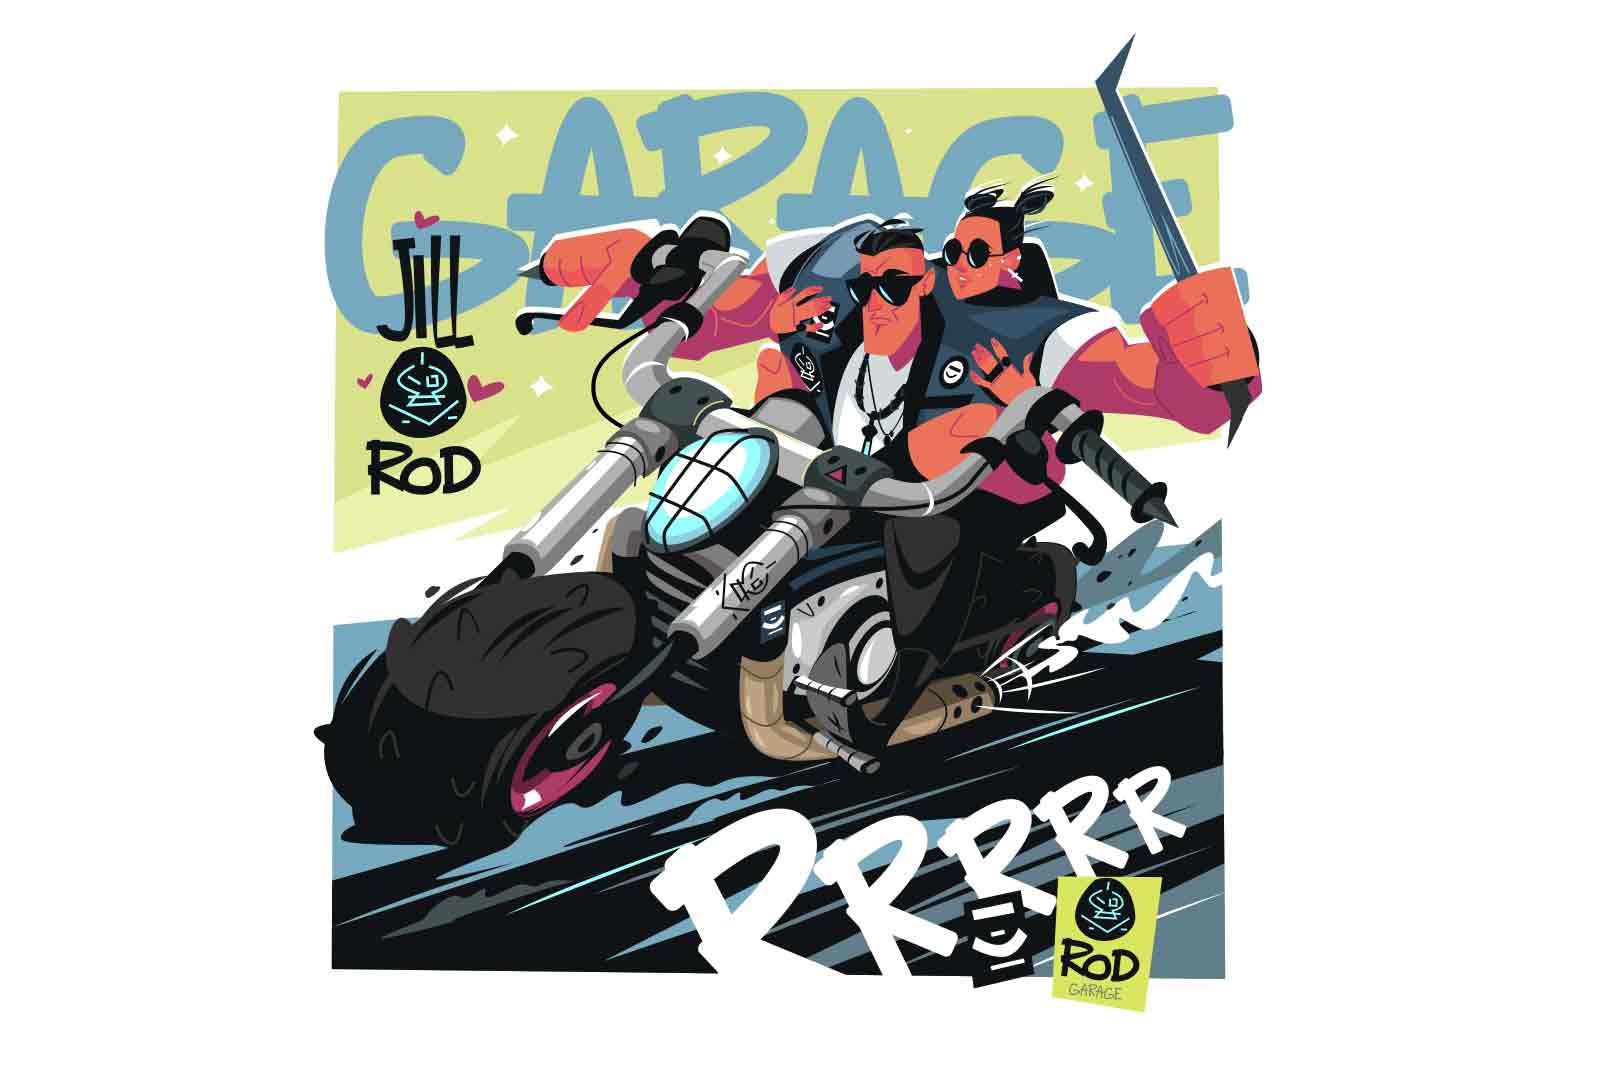 Aggressive biker with crowbar in hand rides motorcycle with girl behind, vector illustration.